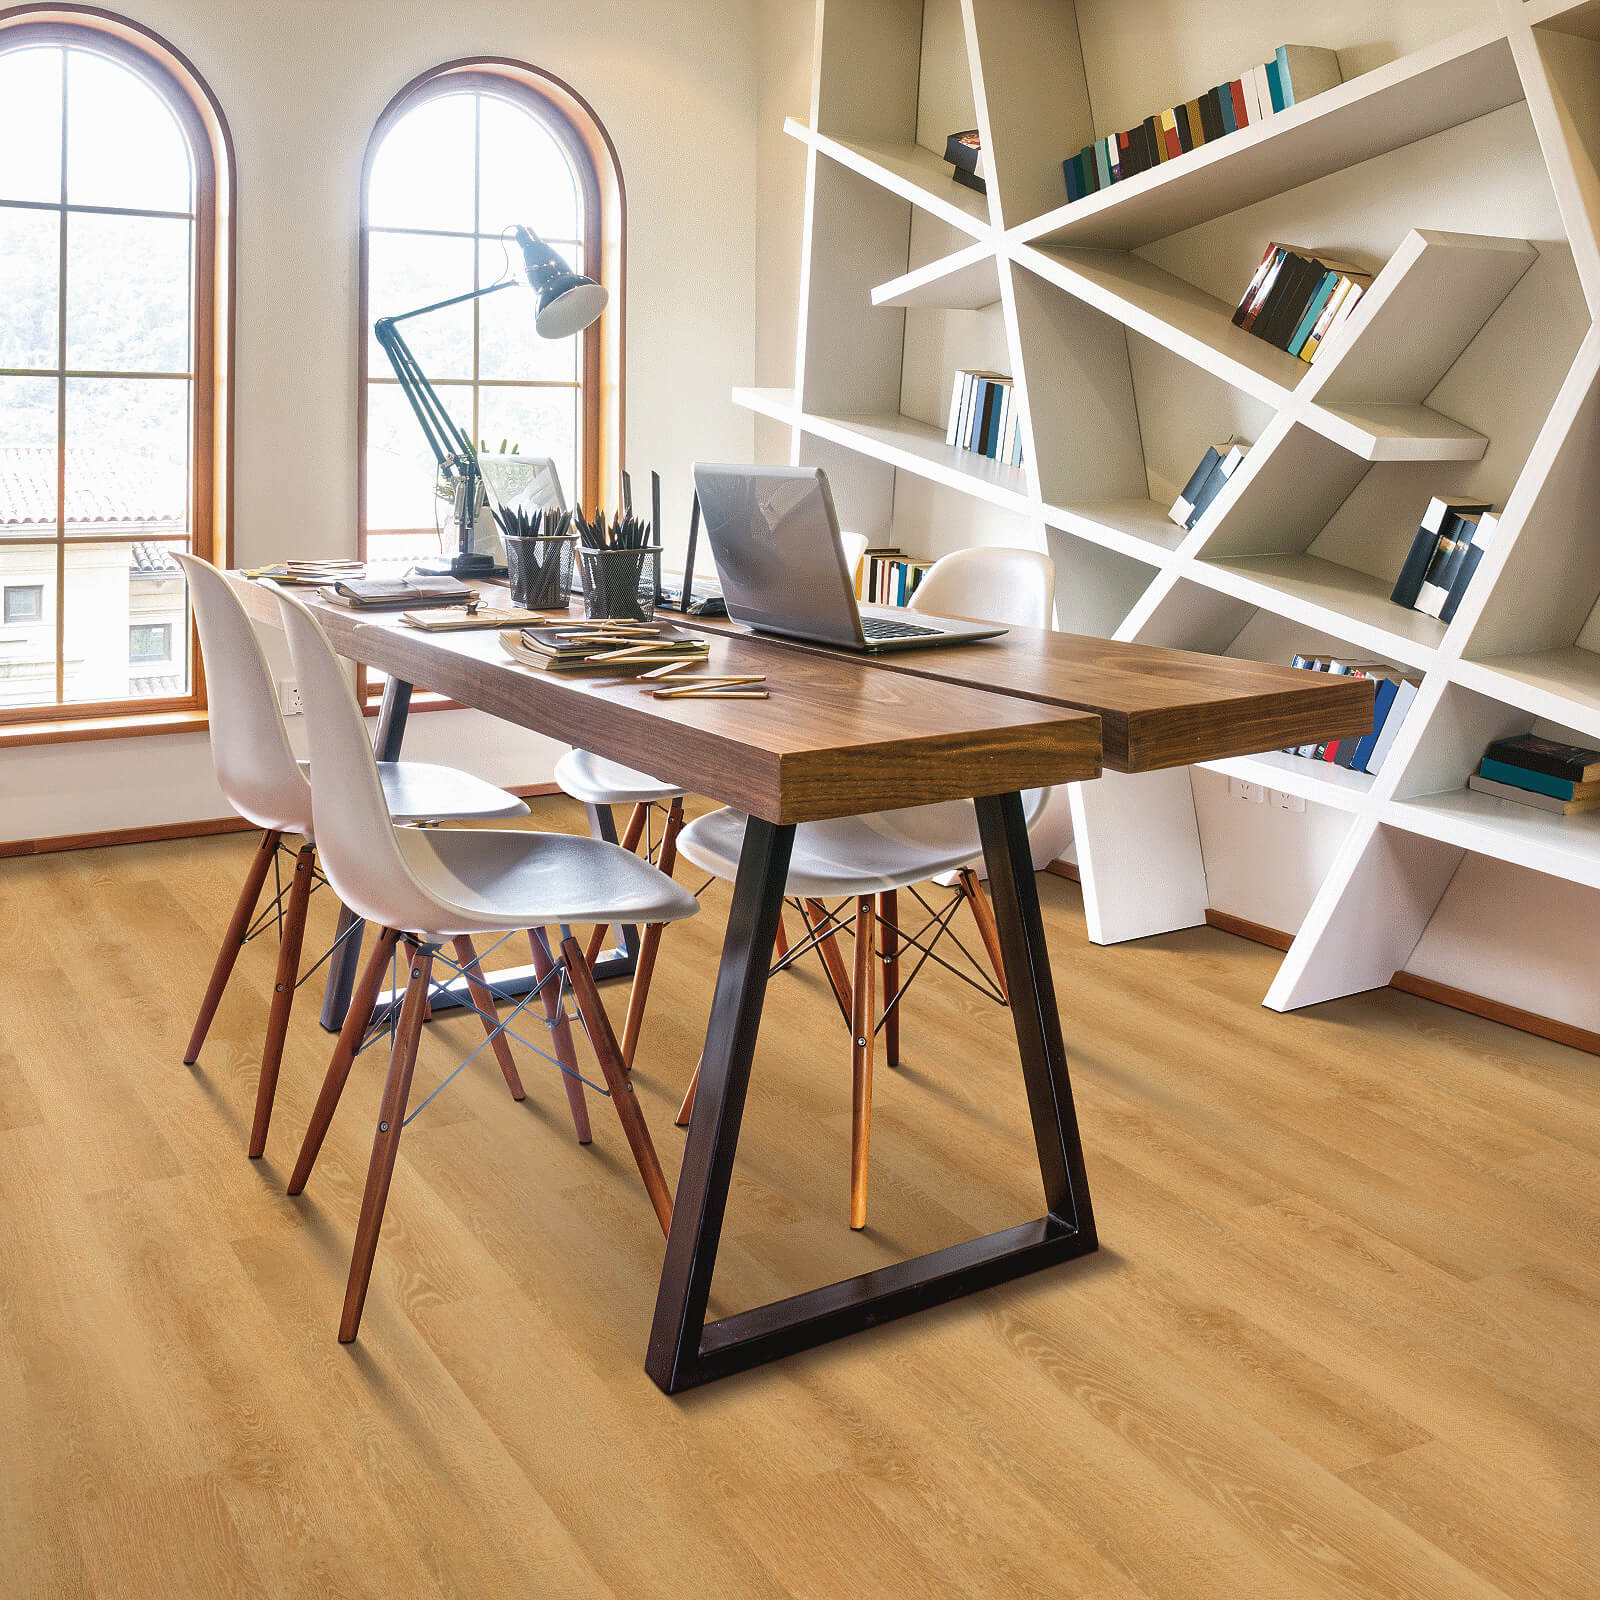 Vinyl flooring for study room | Carpet Collection